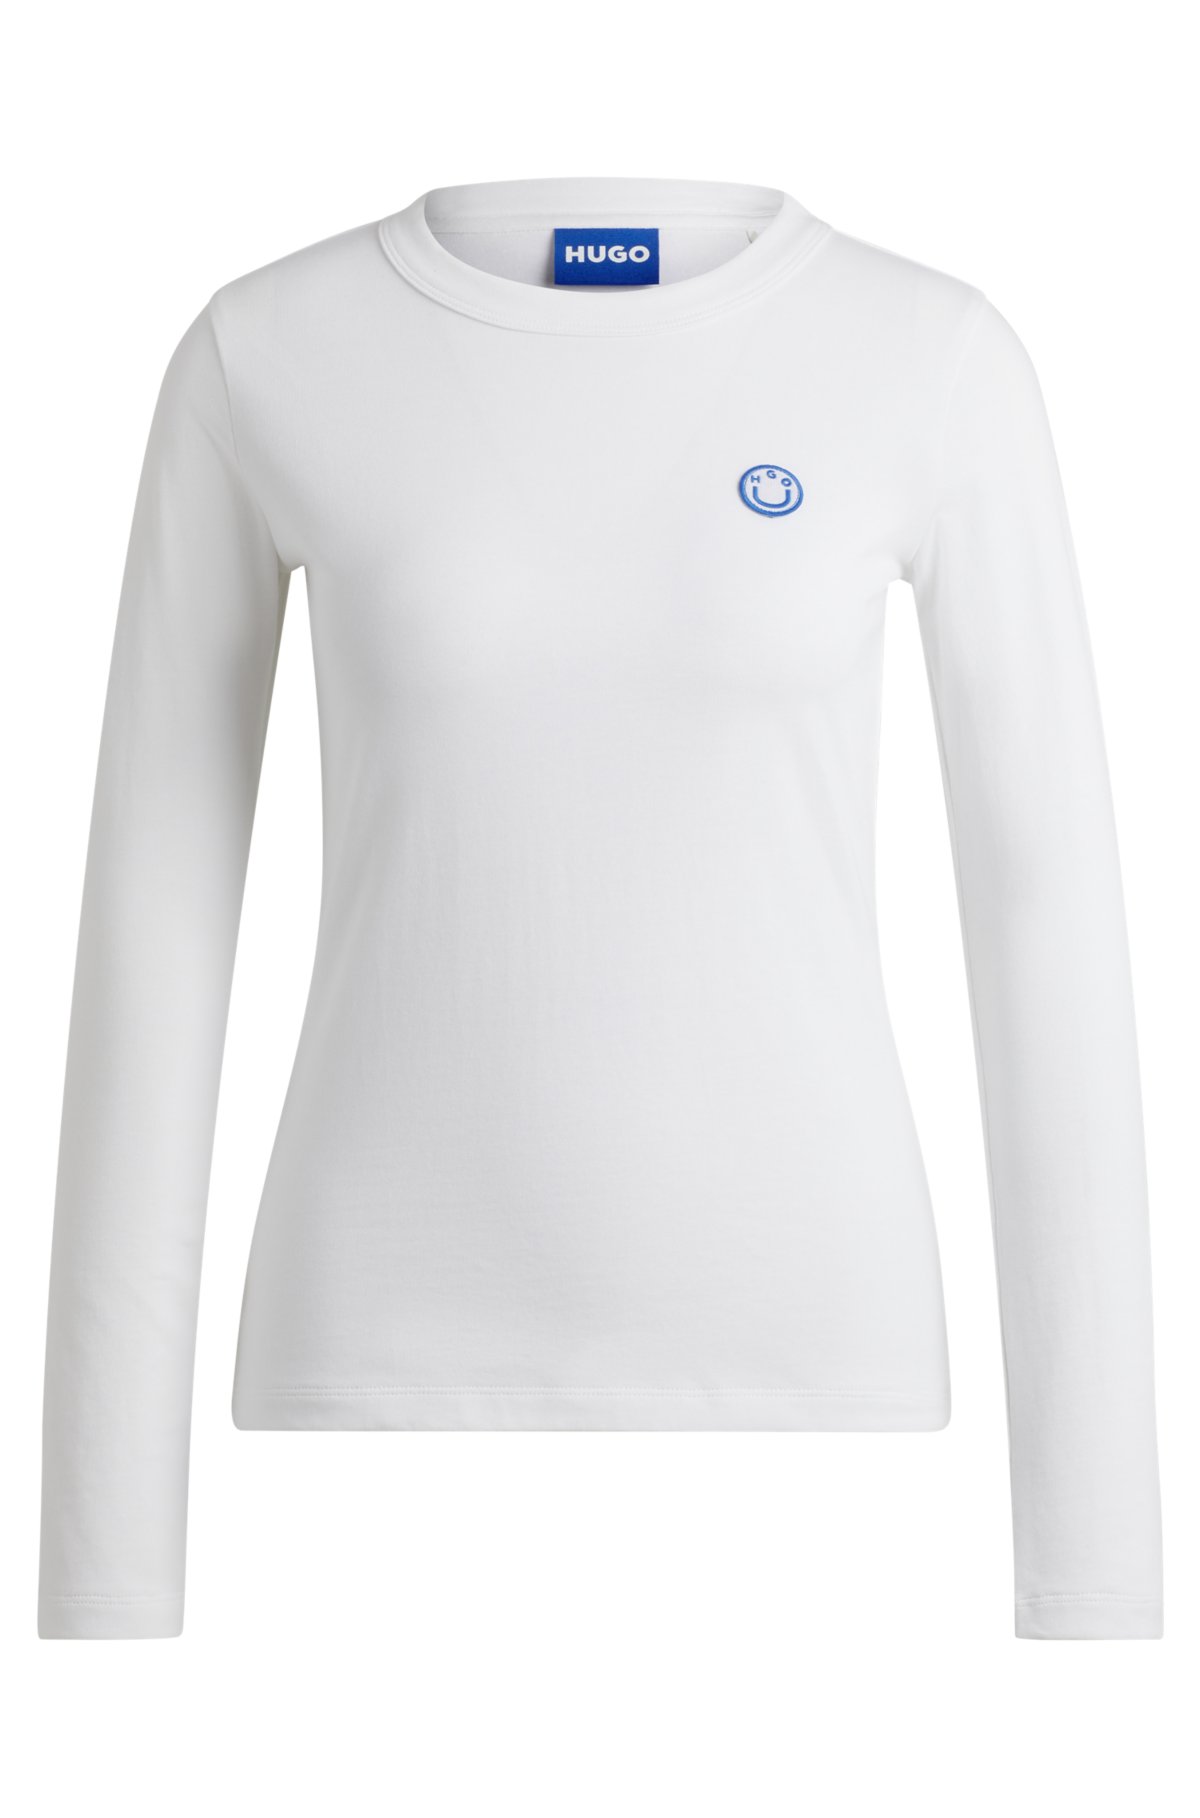 Cotton-jersey top with smiley-face logo badge, White